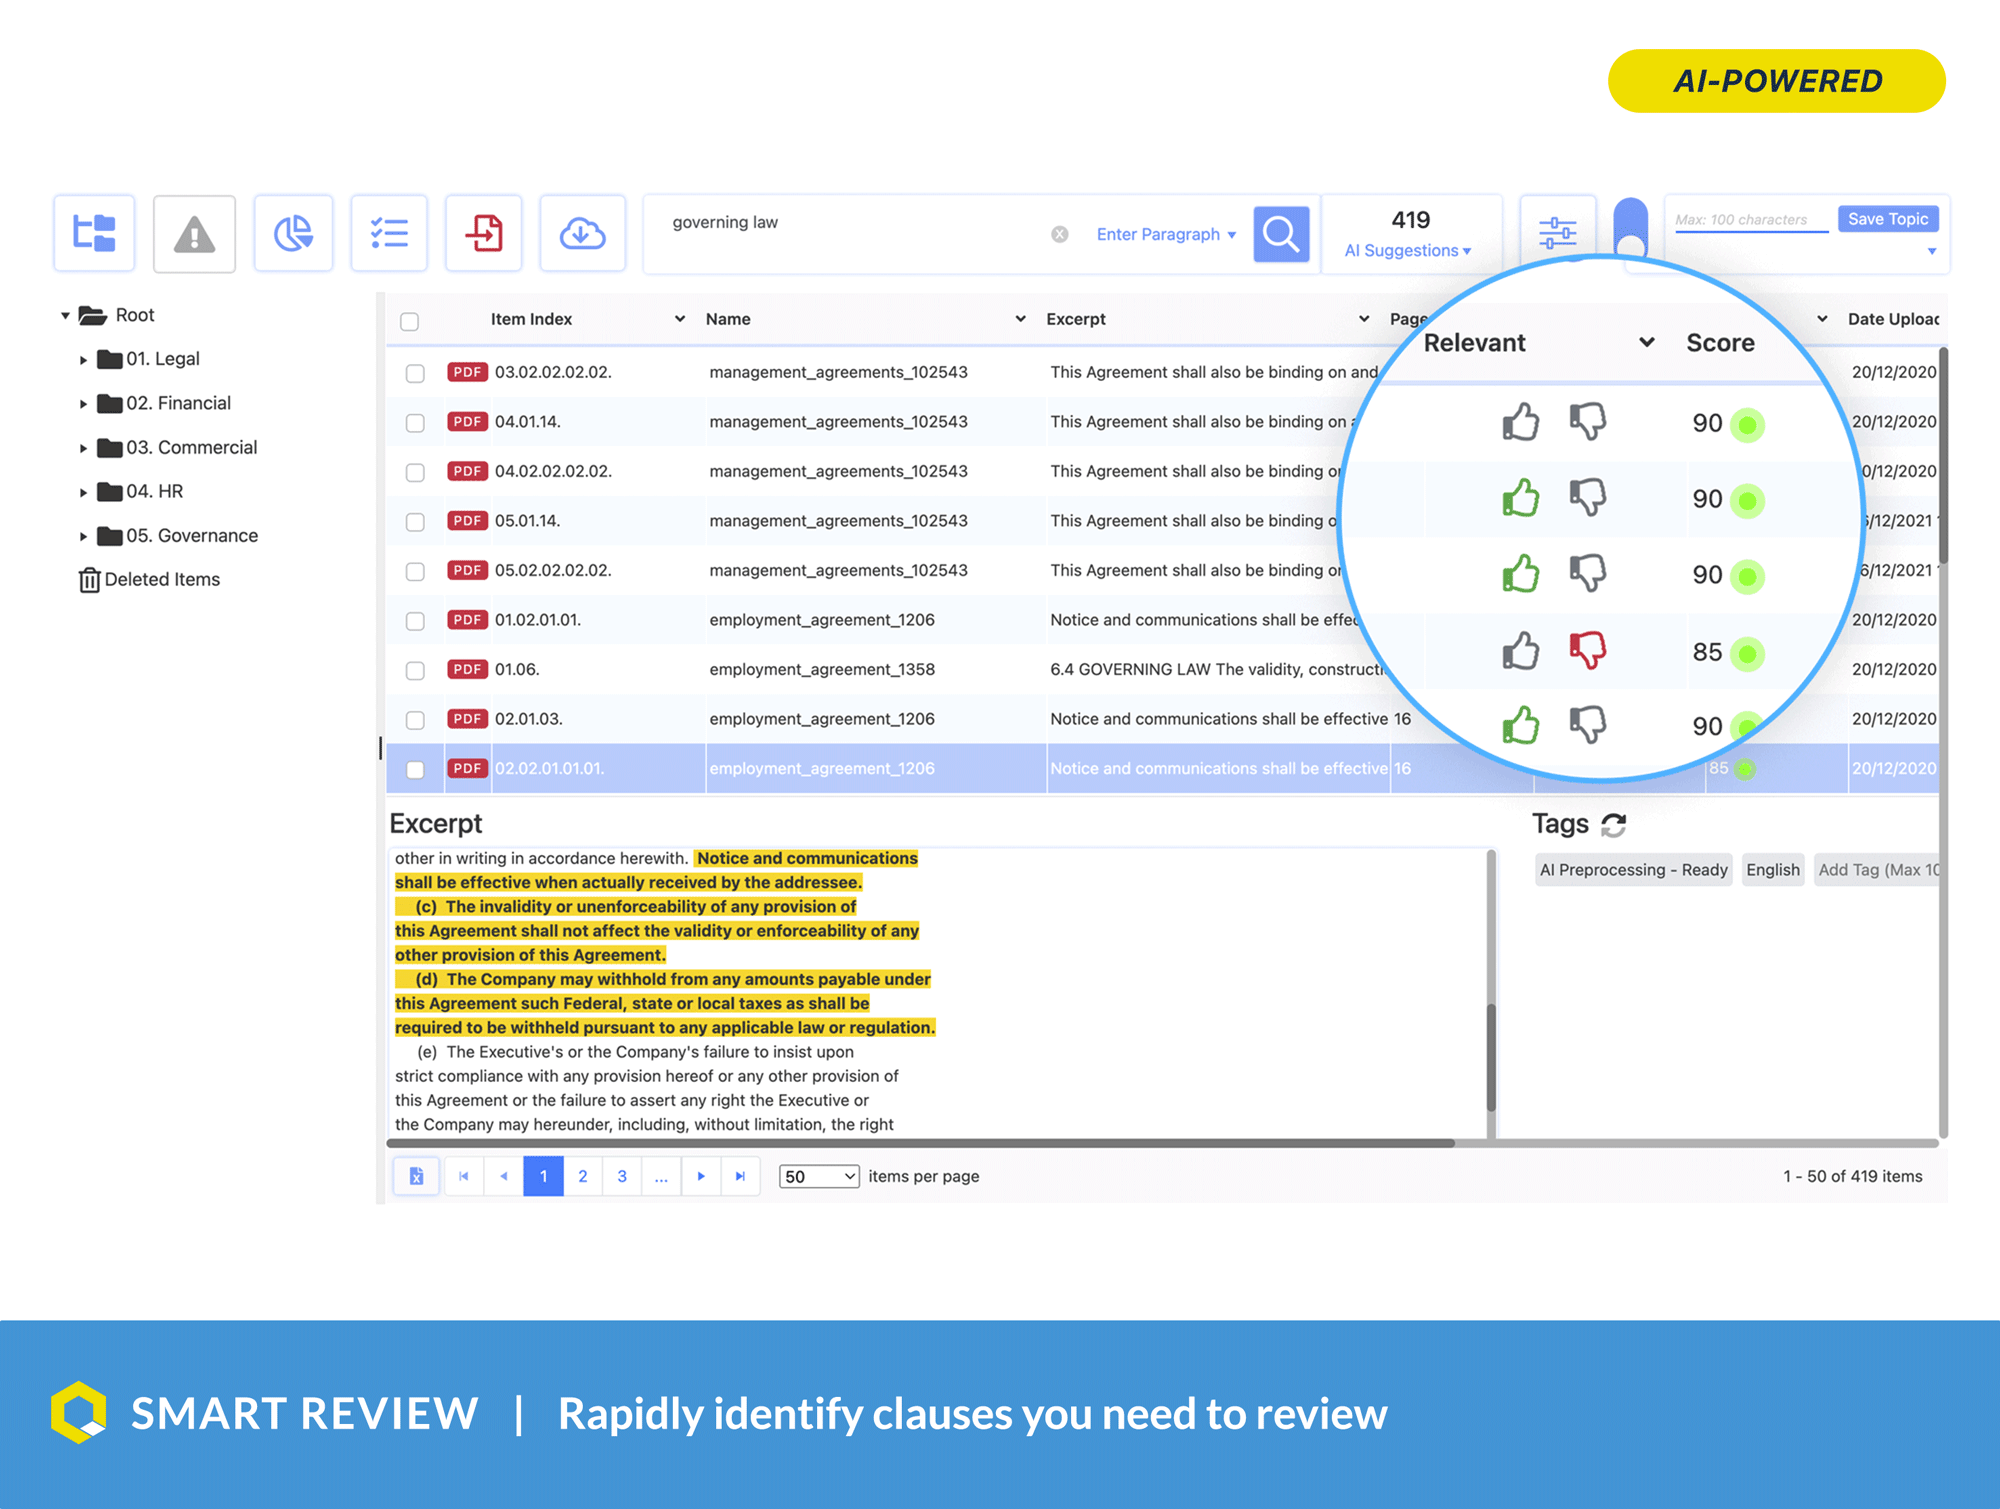 Quickly search through the entire data room to rapidly identify clauses you need to review.